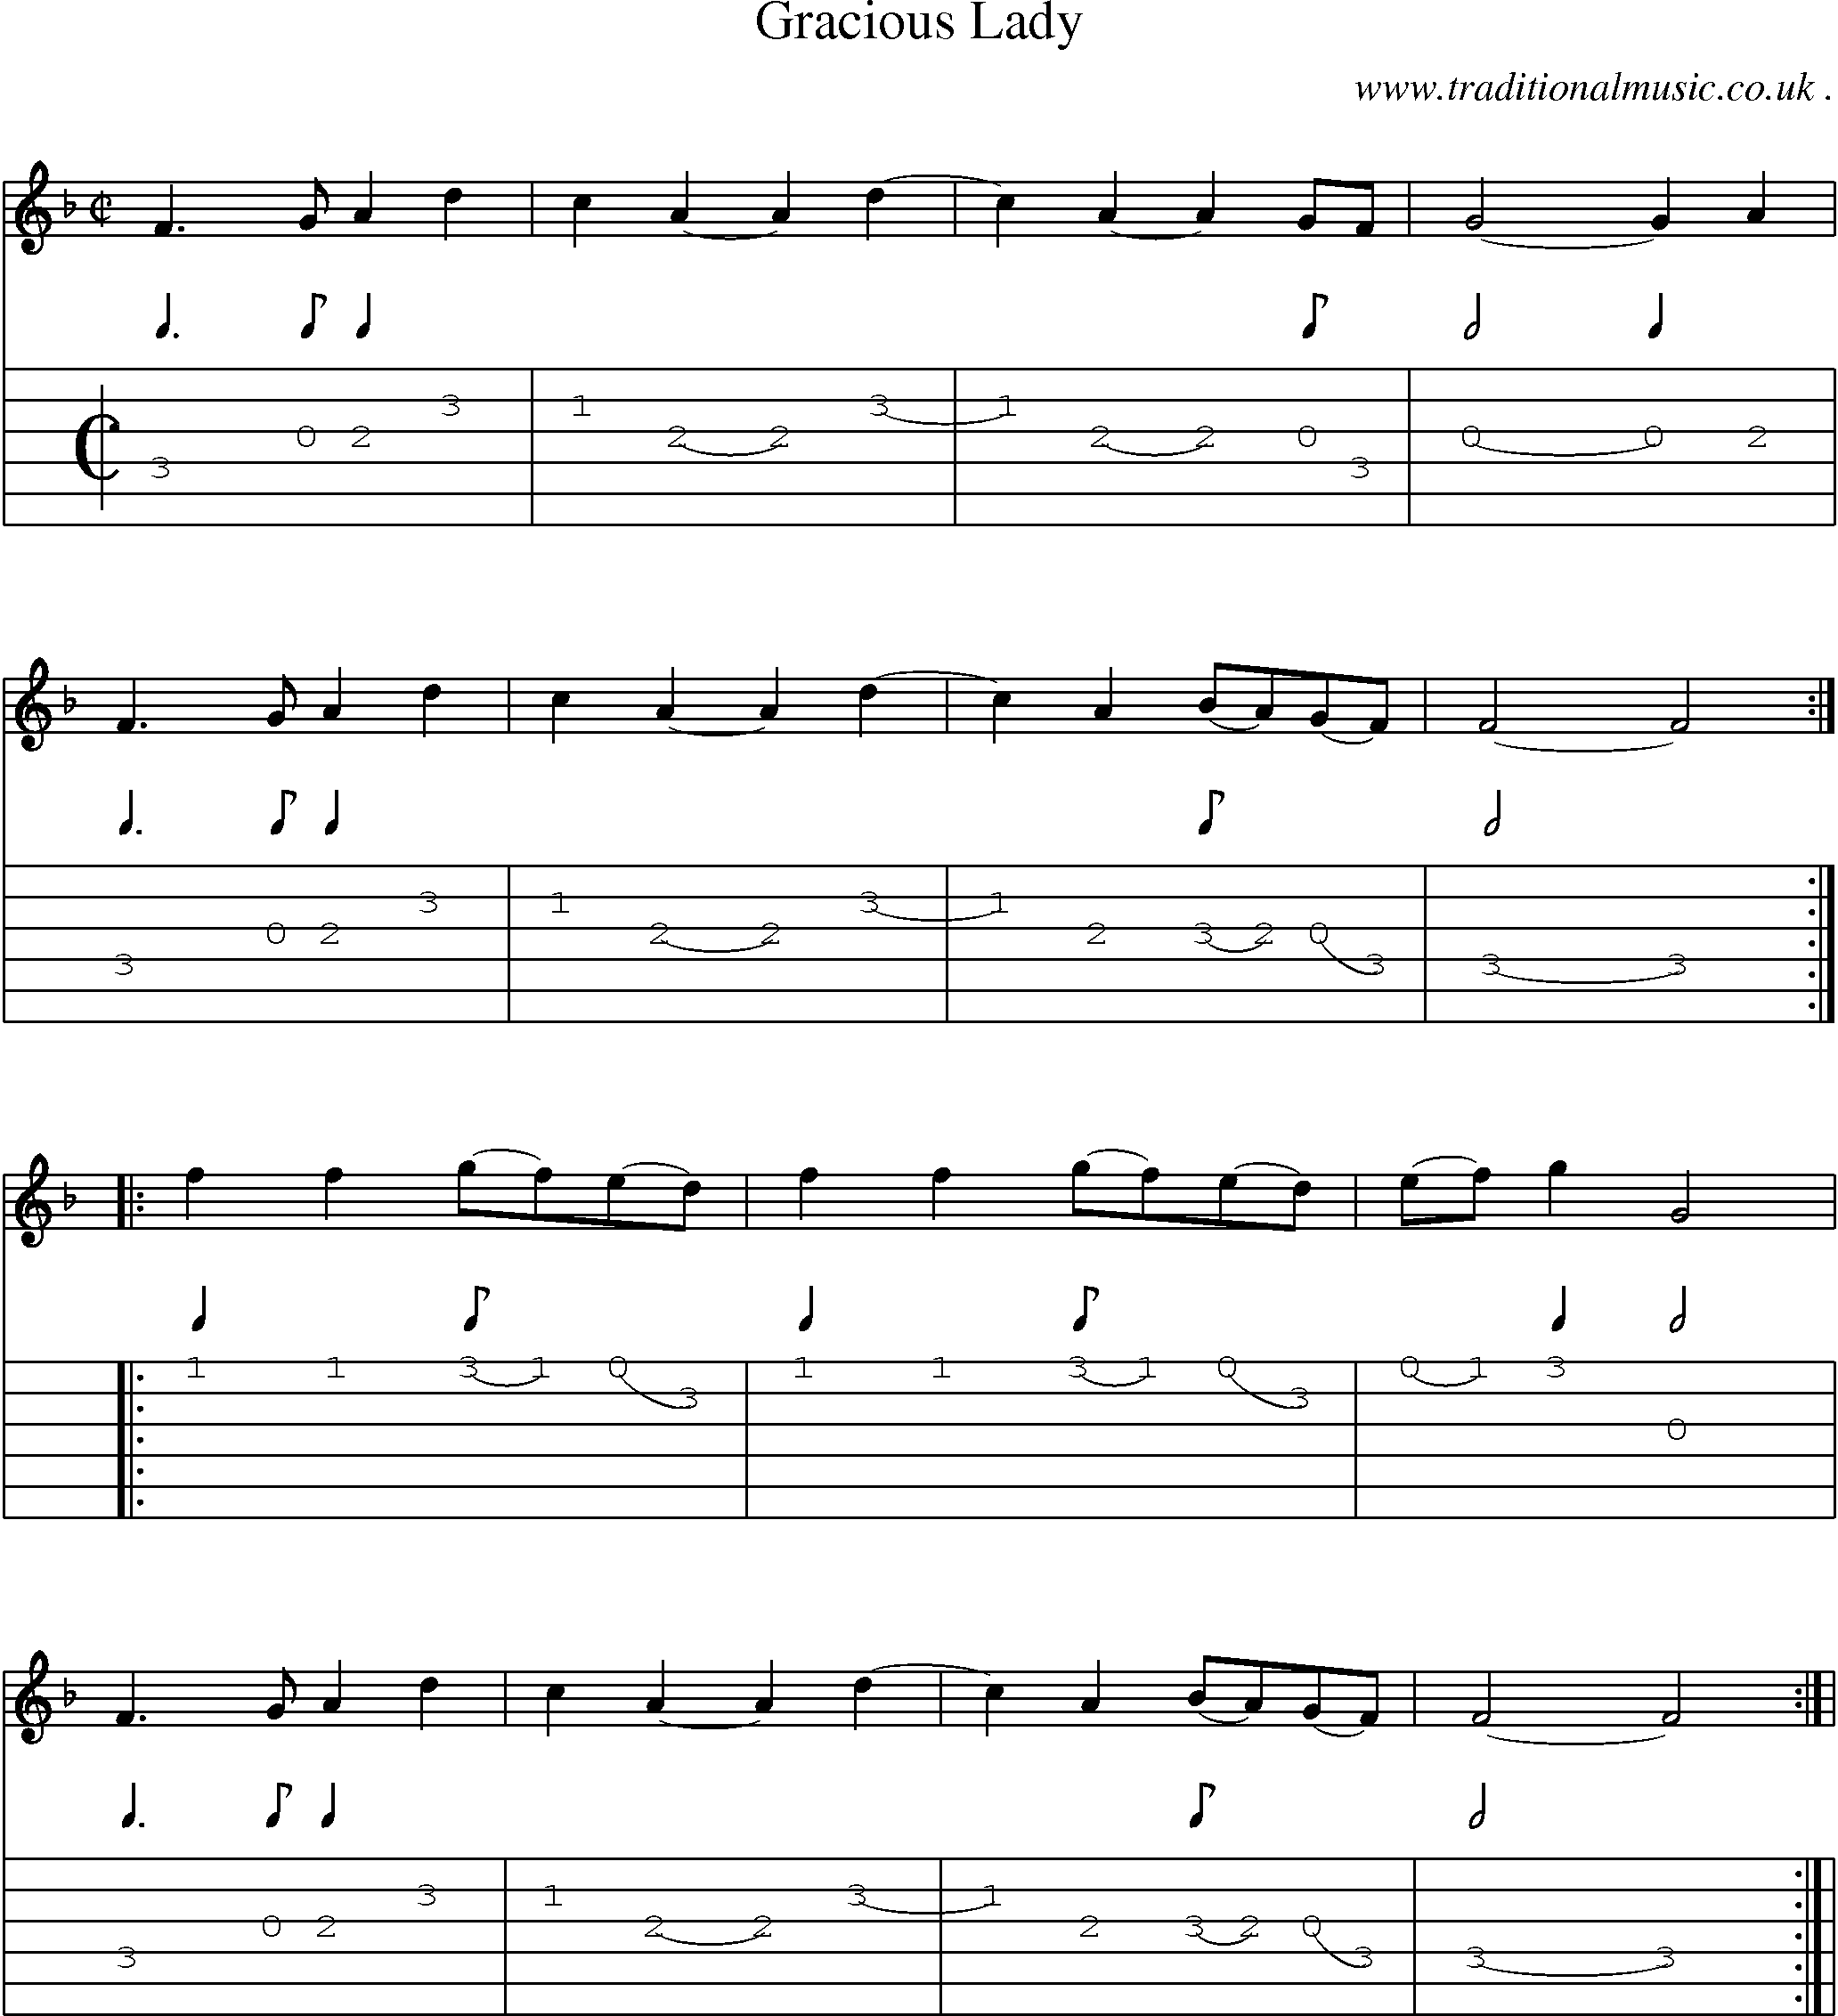 Sheet-Music and Guitar Tabs for Gracious Lady